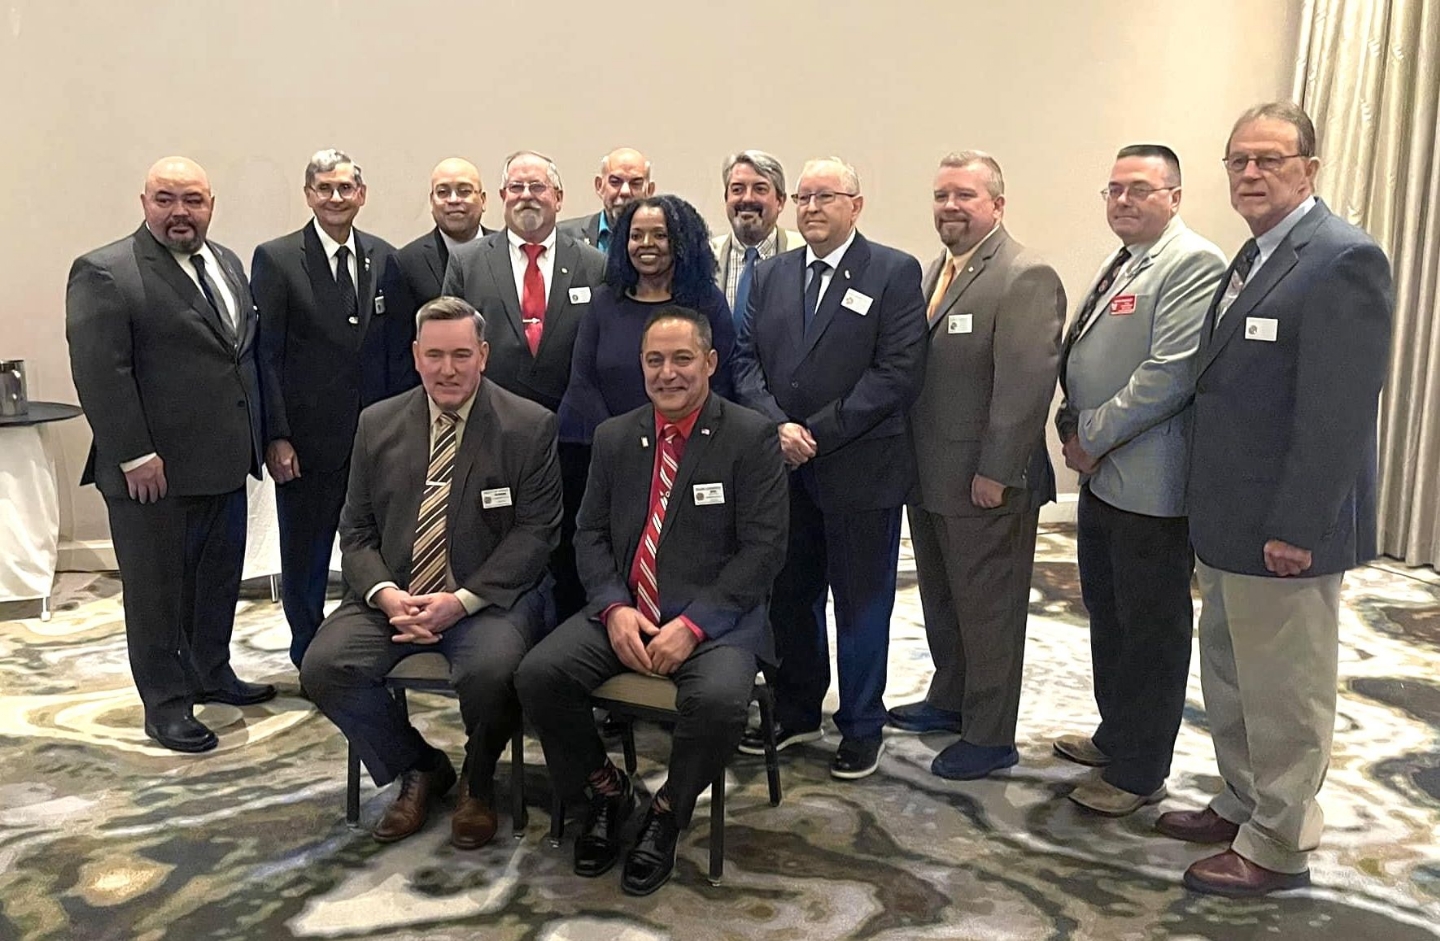 Eastern Conference in New Hampshire. A group shot of all of the Eastern Conference National Council Members with Cmdr and Sr. Vice Commanders -in -Chiefs Tim Borland and Duane Sarmiento, State Commander Mario Richards with Chief Borland, Dave Gerrne, John Kennedy and Matt Seback with the chief and Adjutant General Dan West with John Kennedy and other conference members.  